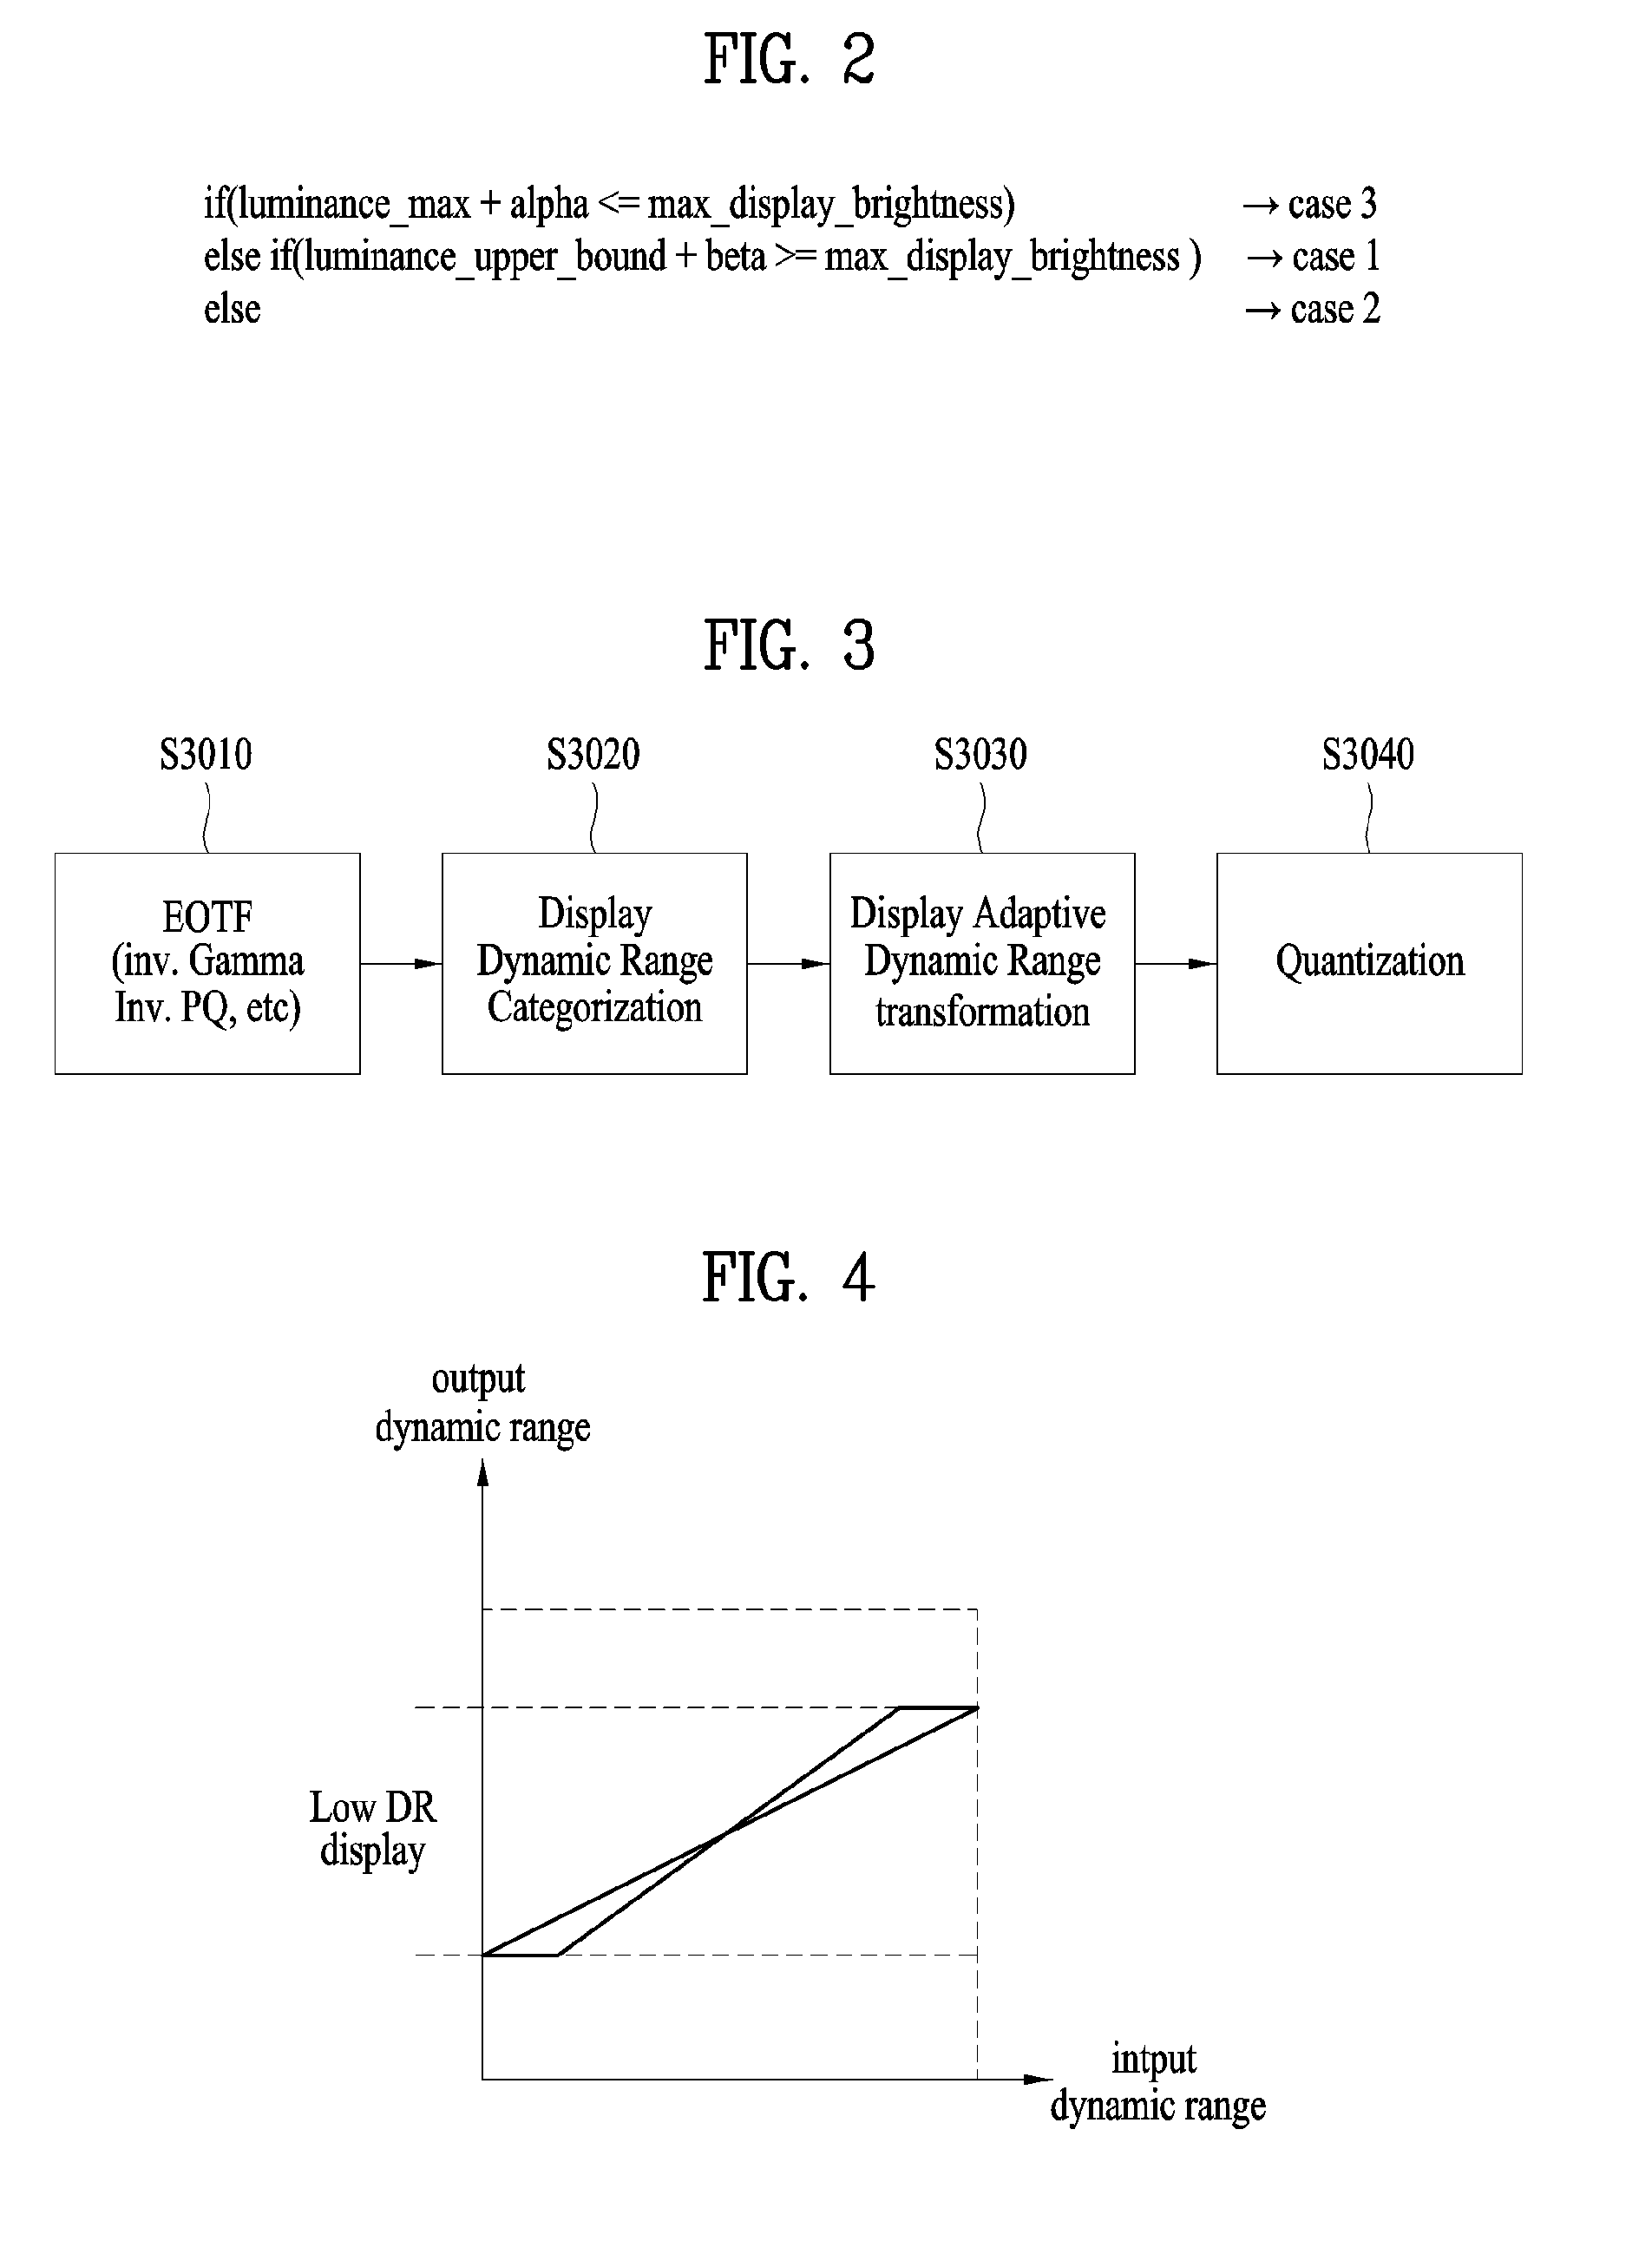 Method and apparatus for transmitting and receiving ultra-high definition broadcasting signal for high dynamic range representation in digital broadcasting system